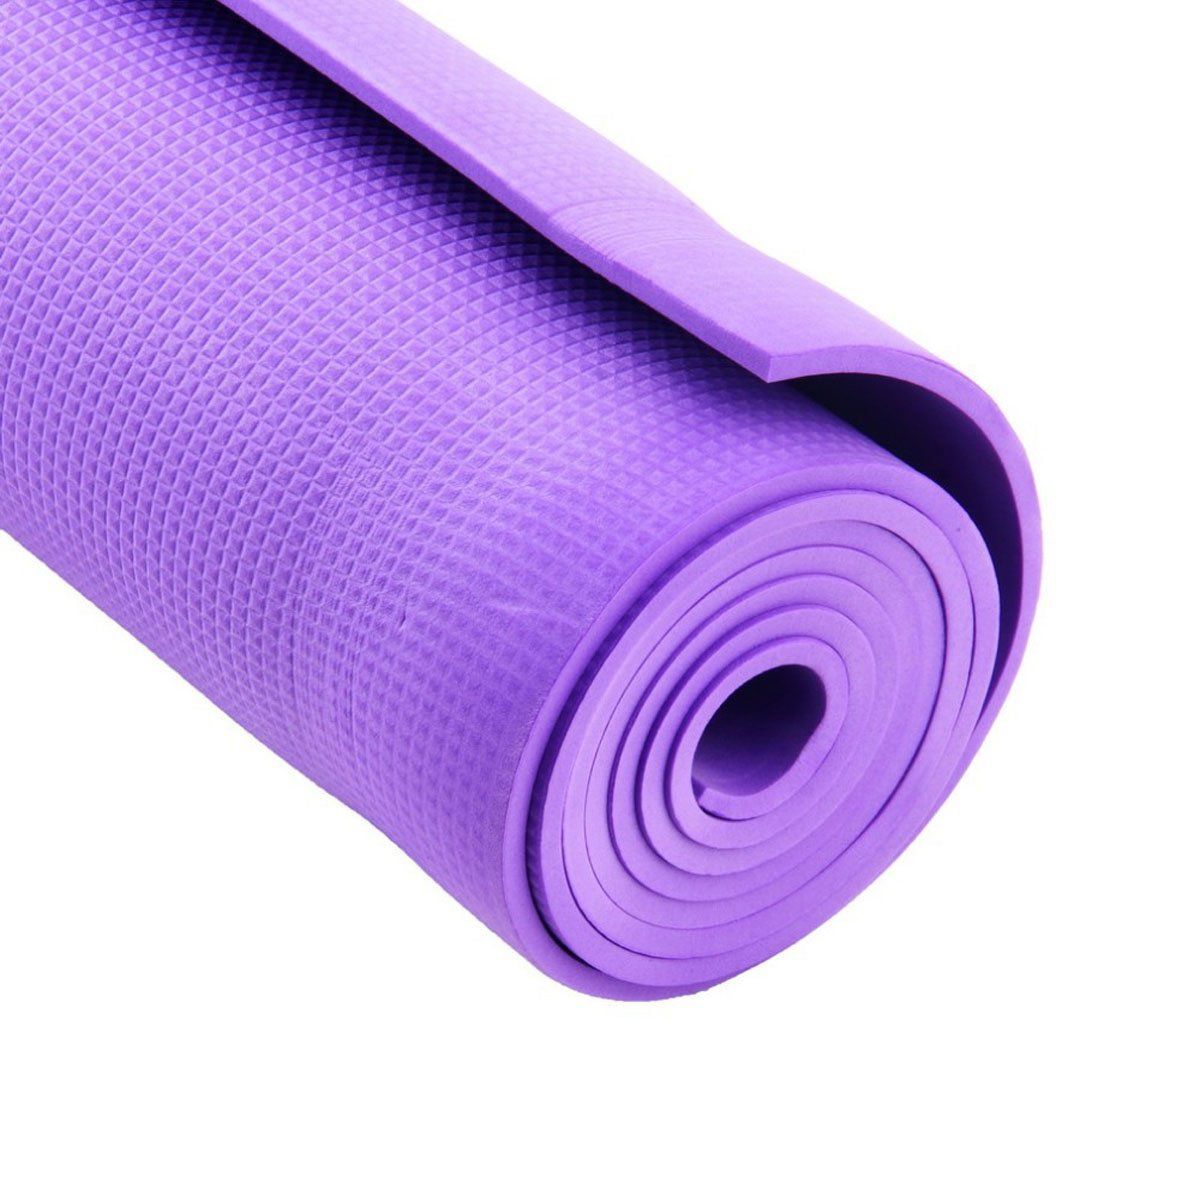  20 Pcs Yoga Mats 68 x 24 x 0.16 Inch, 4 mm Thick, with 20 Pcs  Yoga Stretch Straps Colorful Yoga Exercise Mats Workout Mats with Yoga  Straps for Women